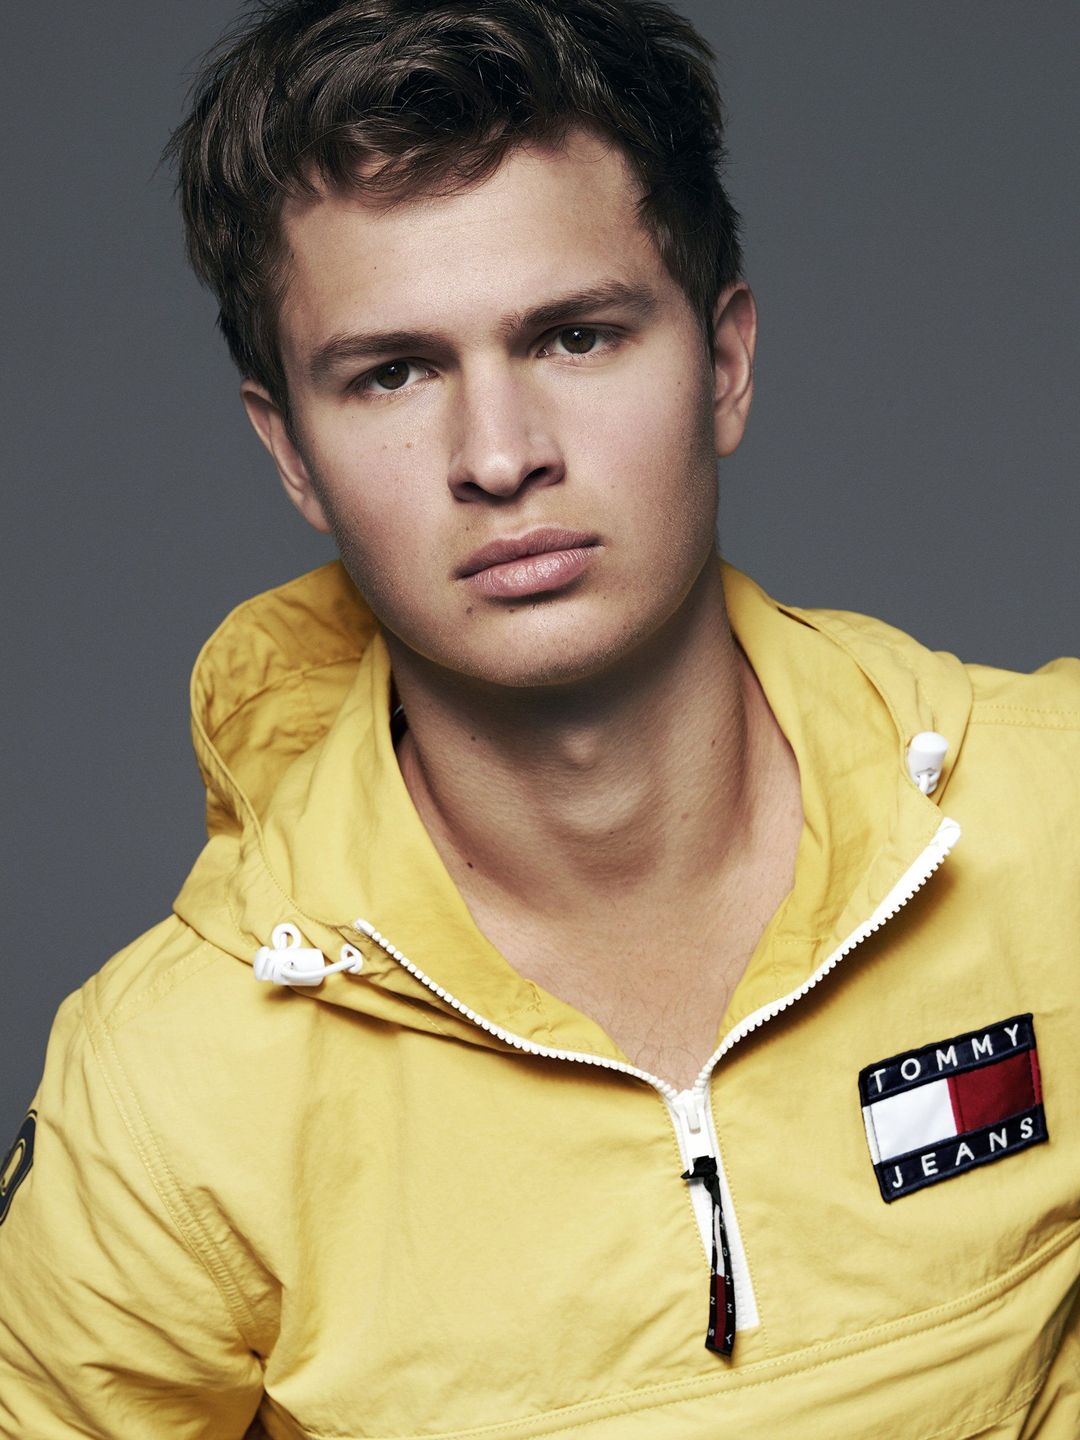 Ansel Elgort how old is he